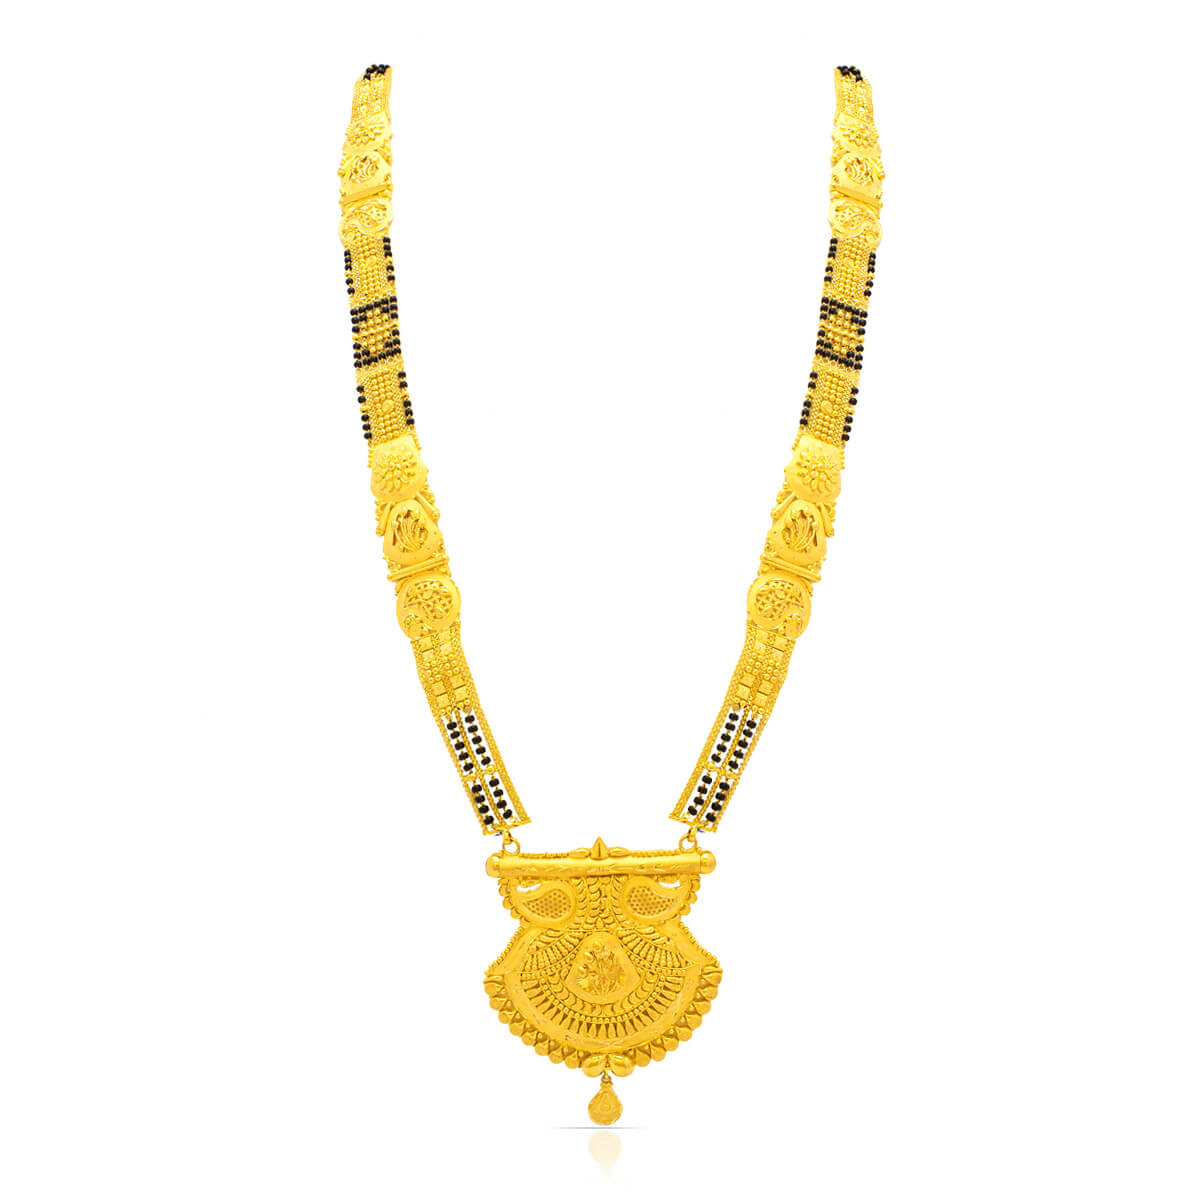 FIND UNIQUE DESIGNS OF LONG NECKLACE ONLINE - WHP Jewellers